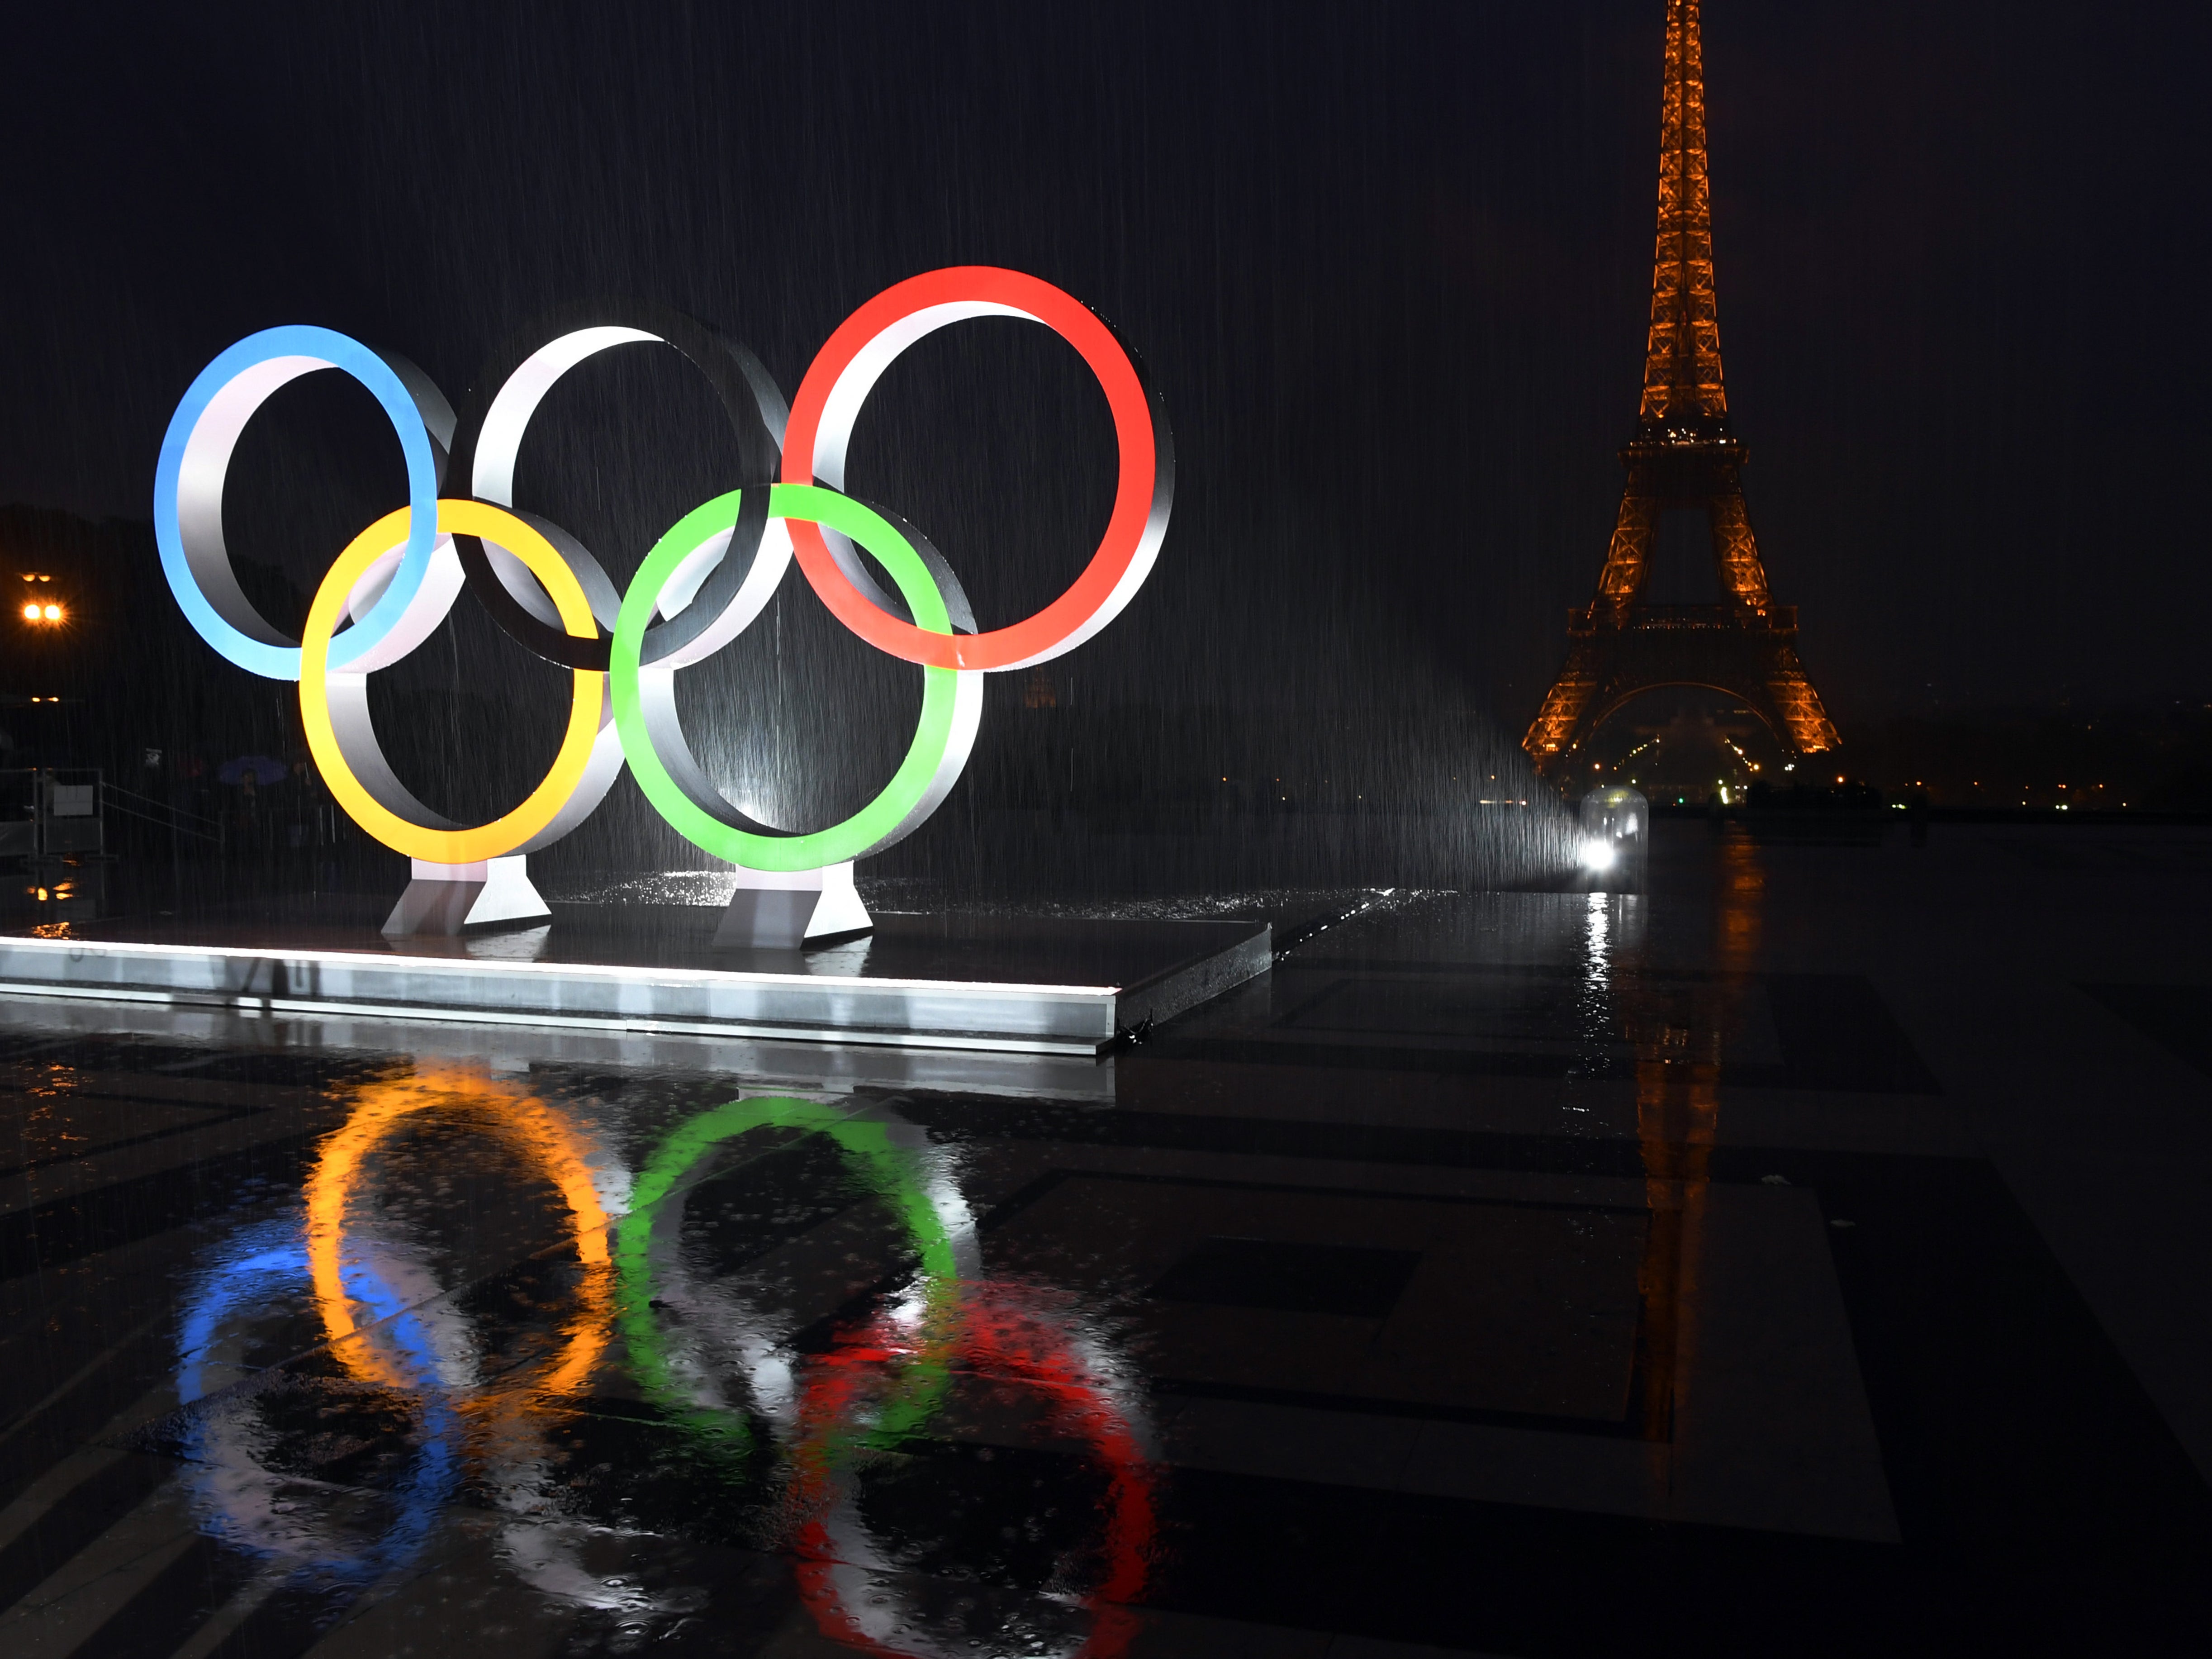 Paris is gearing up to host the 2024 Olympics